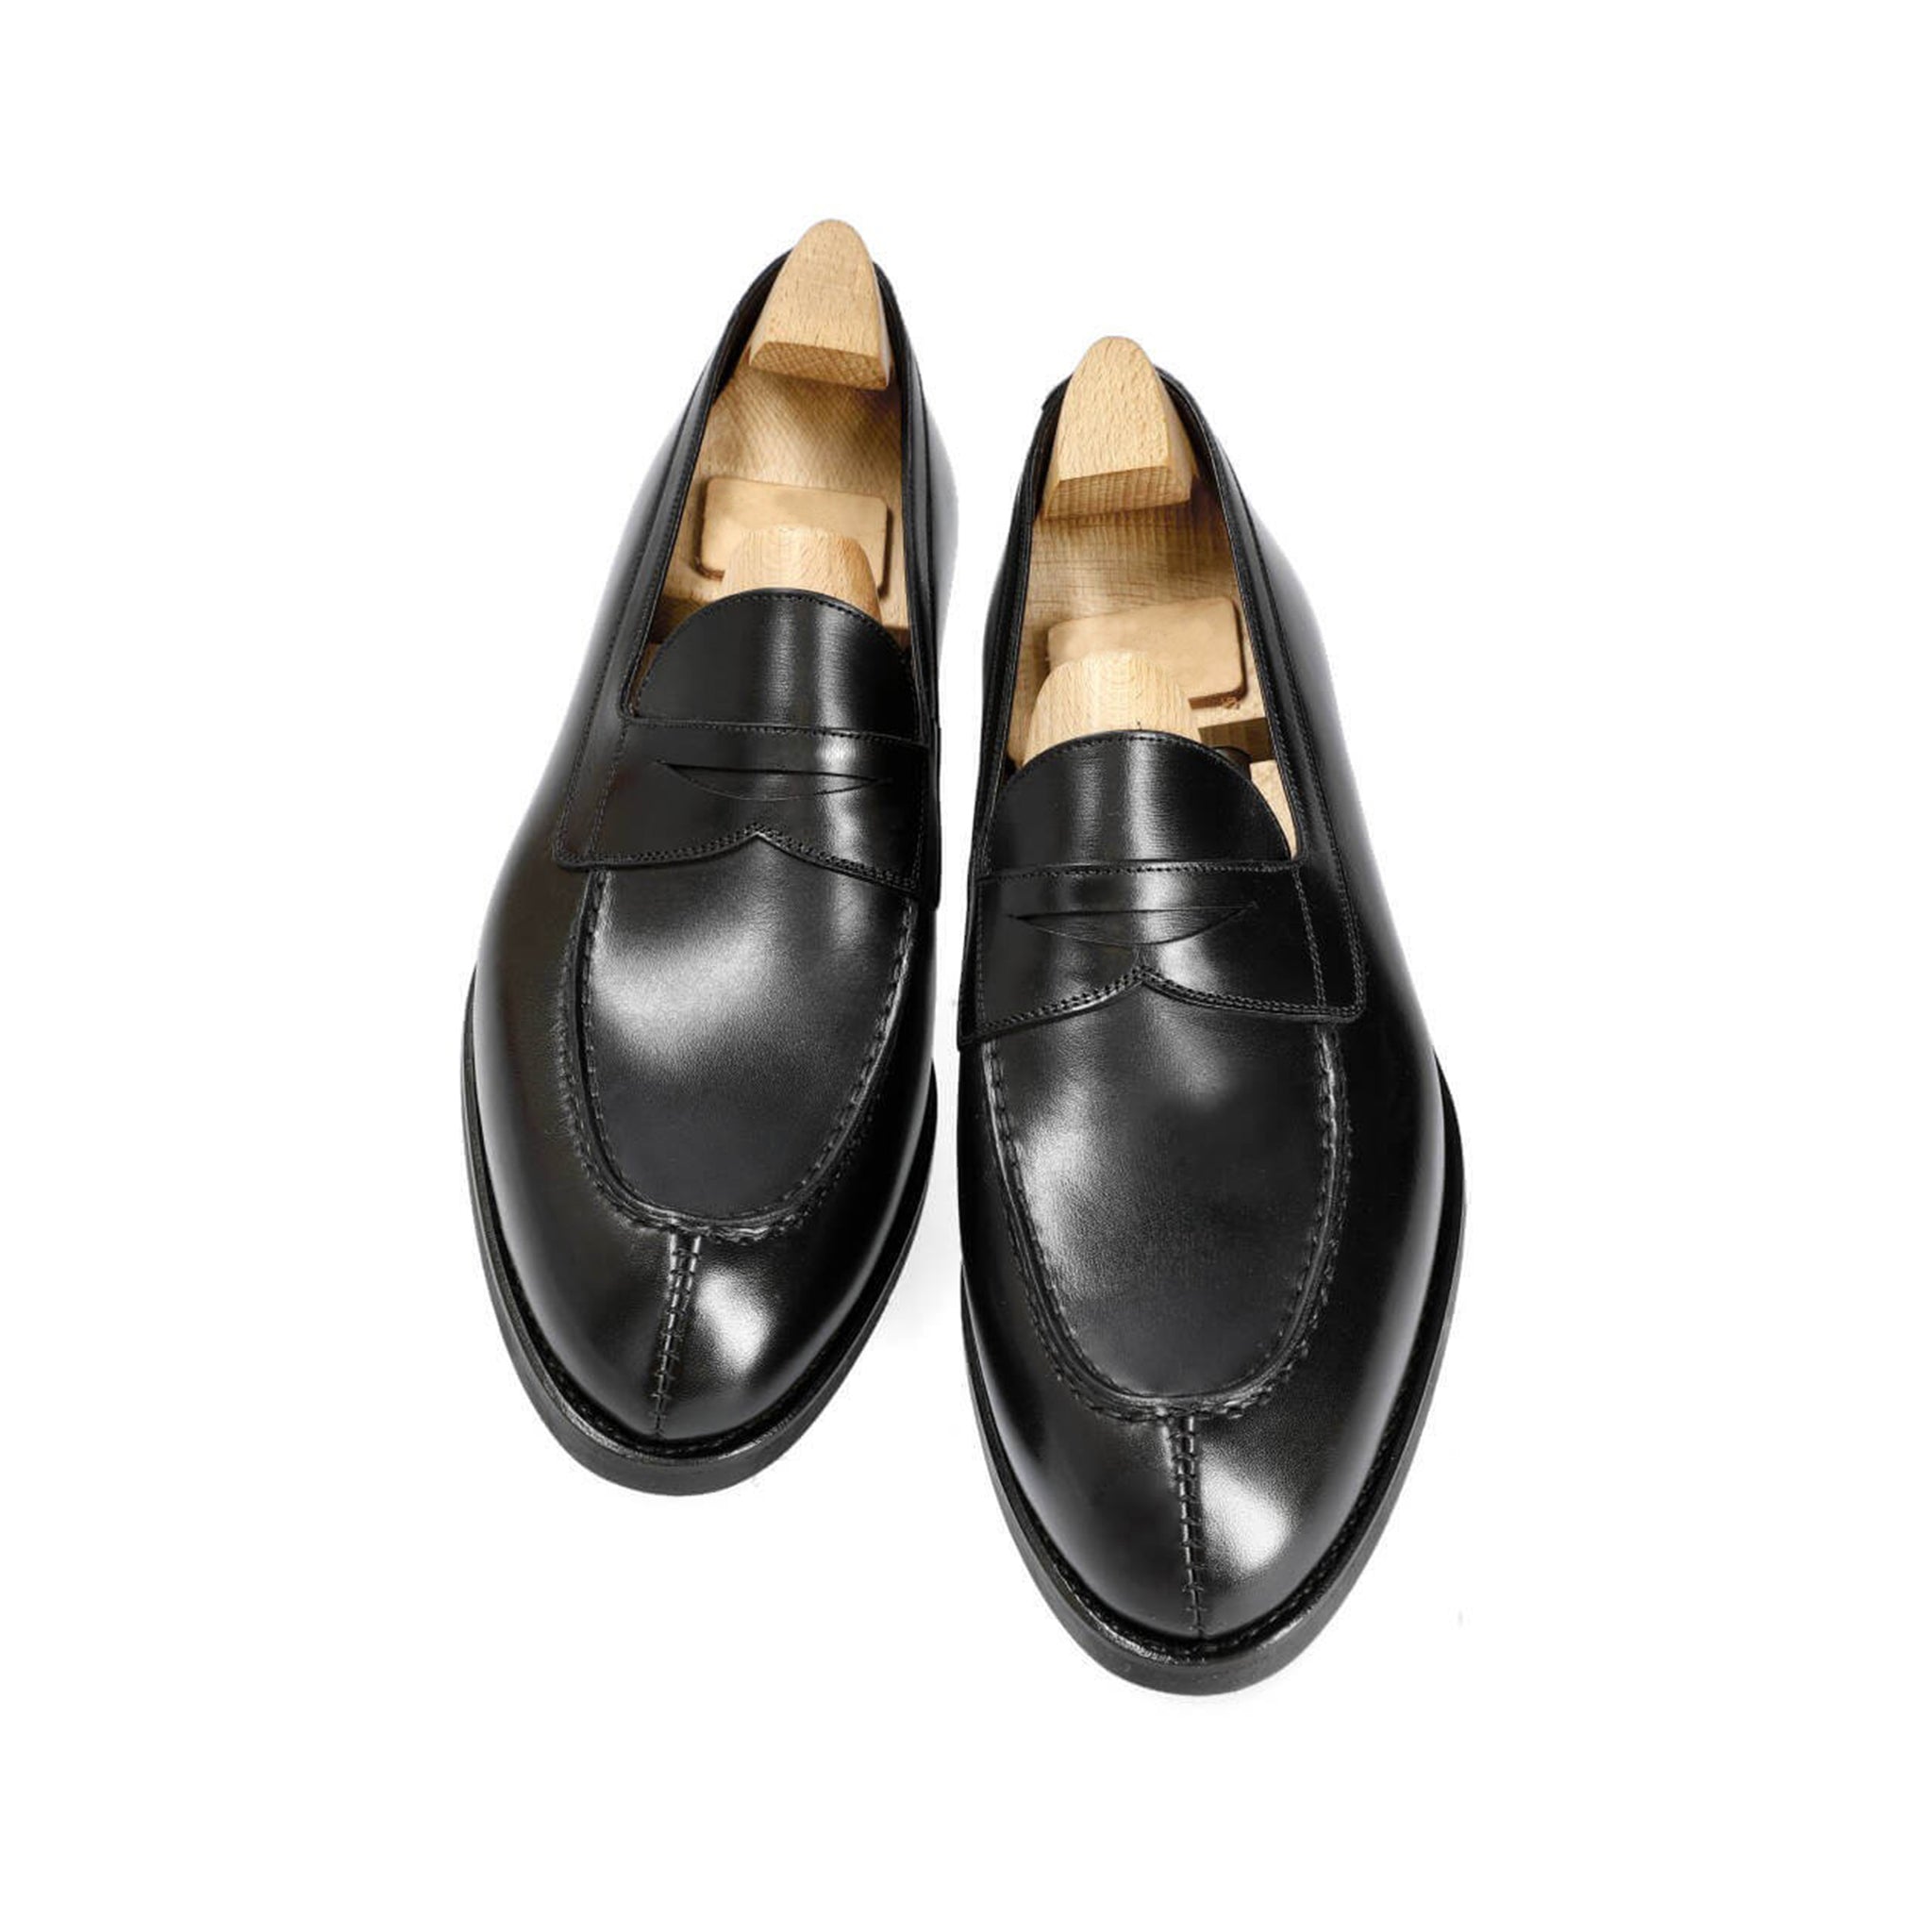 Palmelato Norweign Penny Loafers